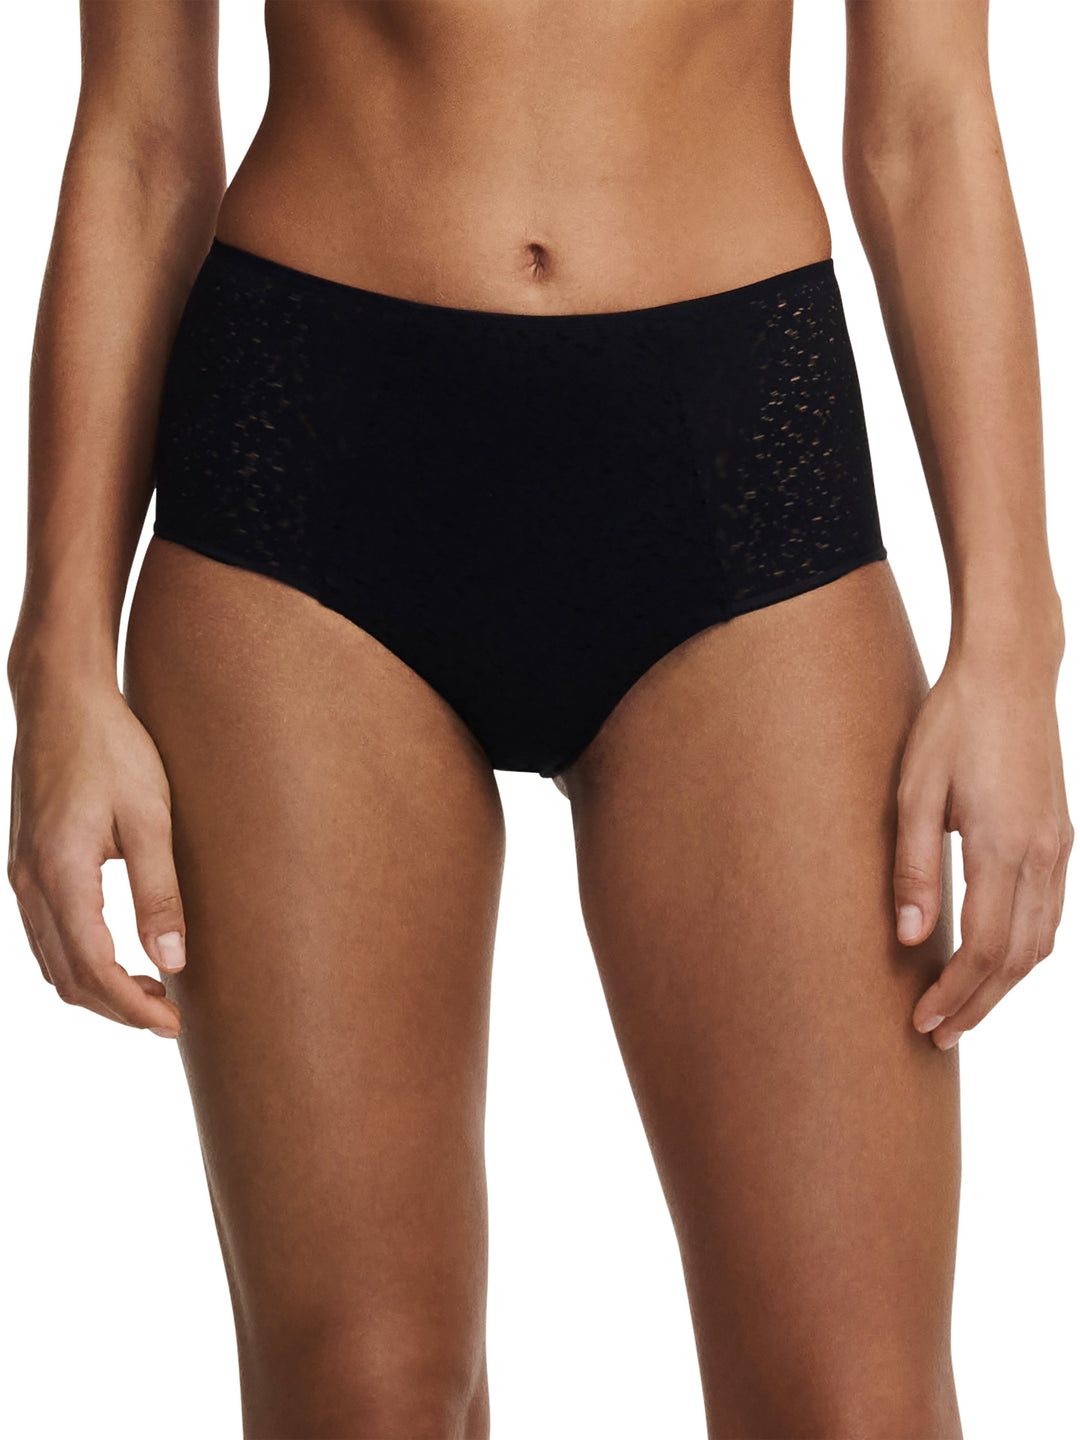 Chantelle Norah High Waisted Covering Full Brief - Black Full Brief Chantelle 